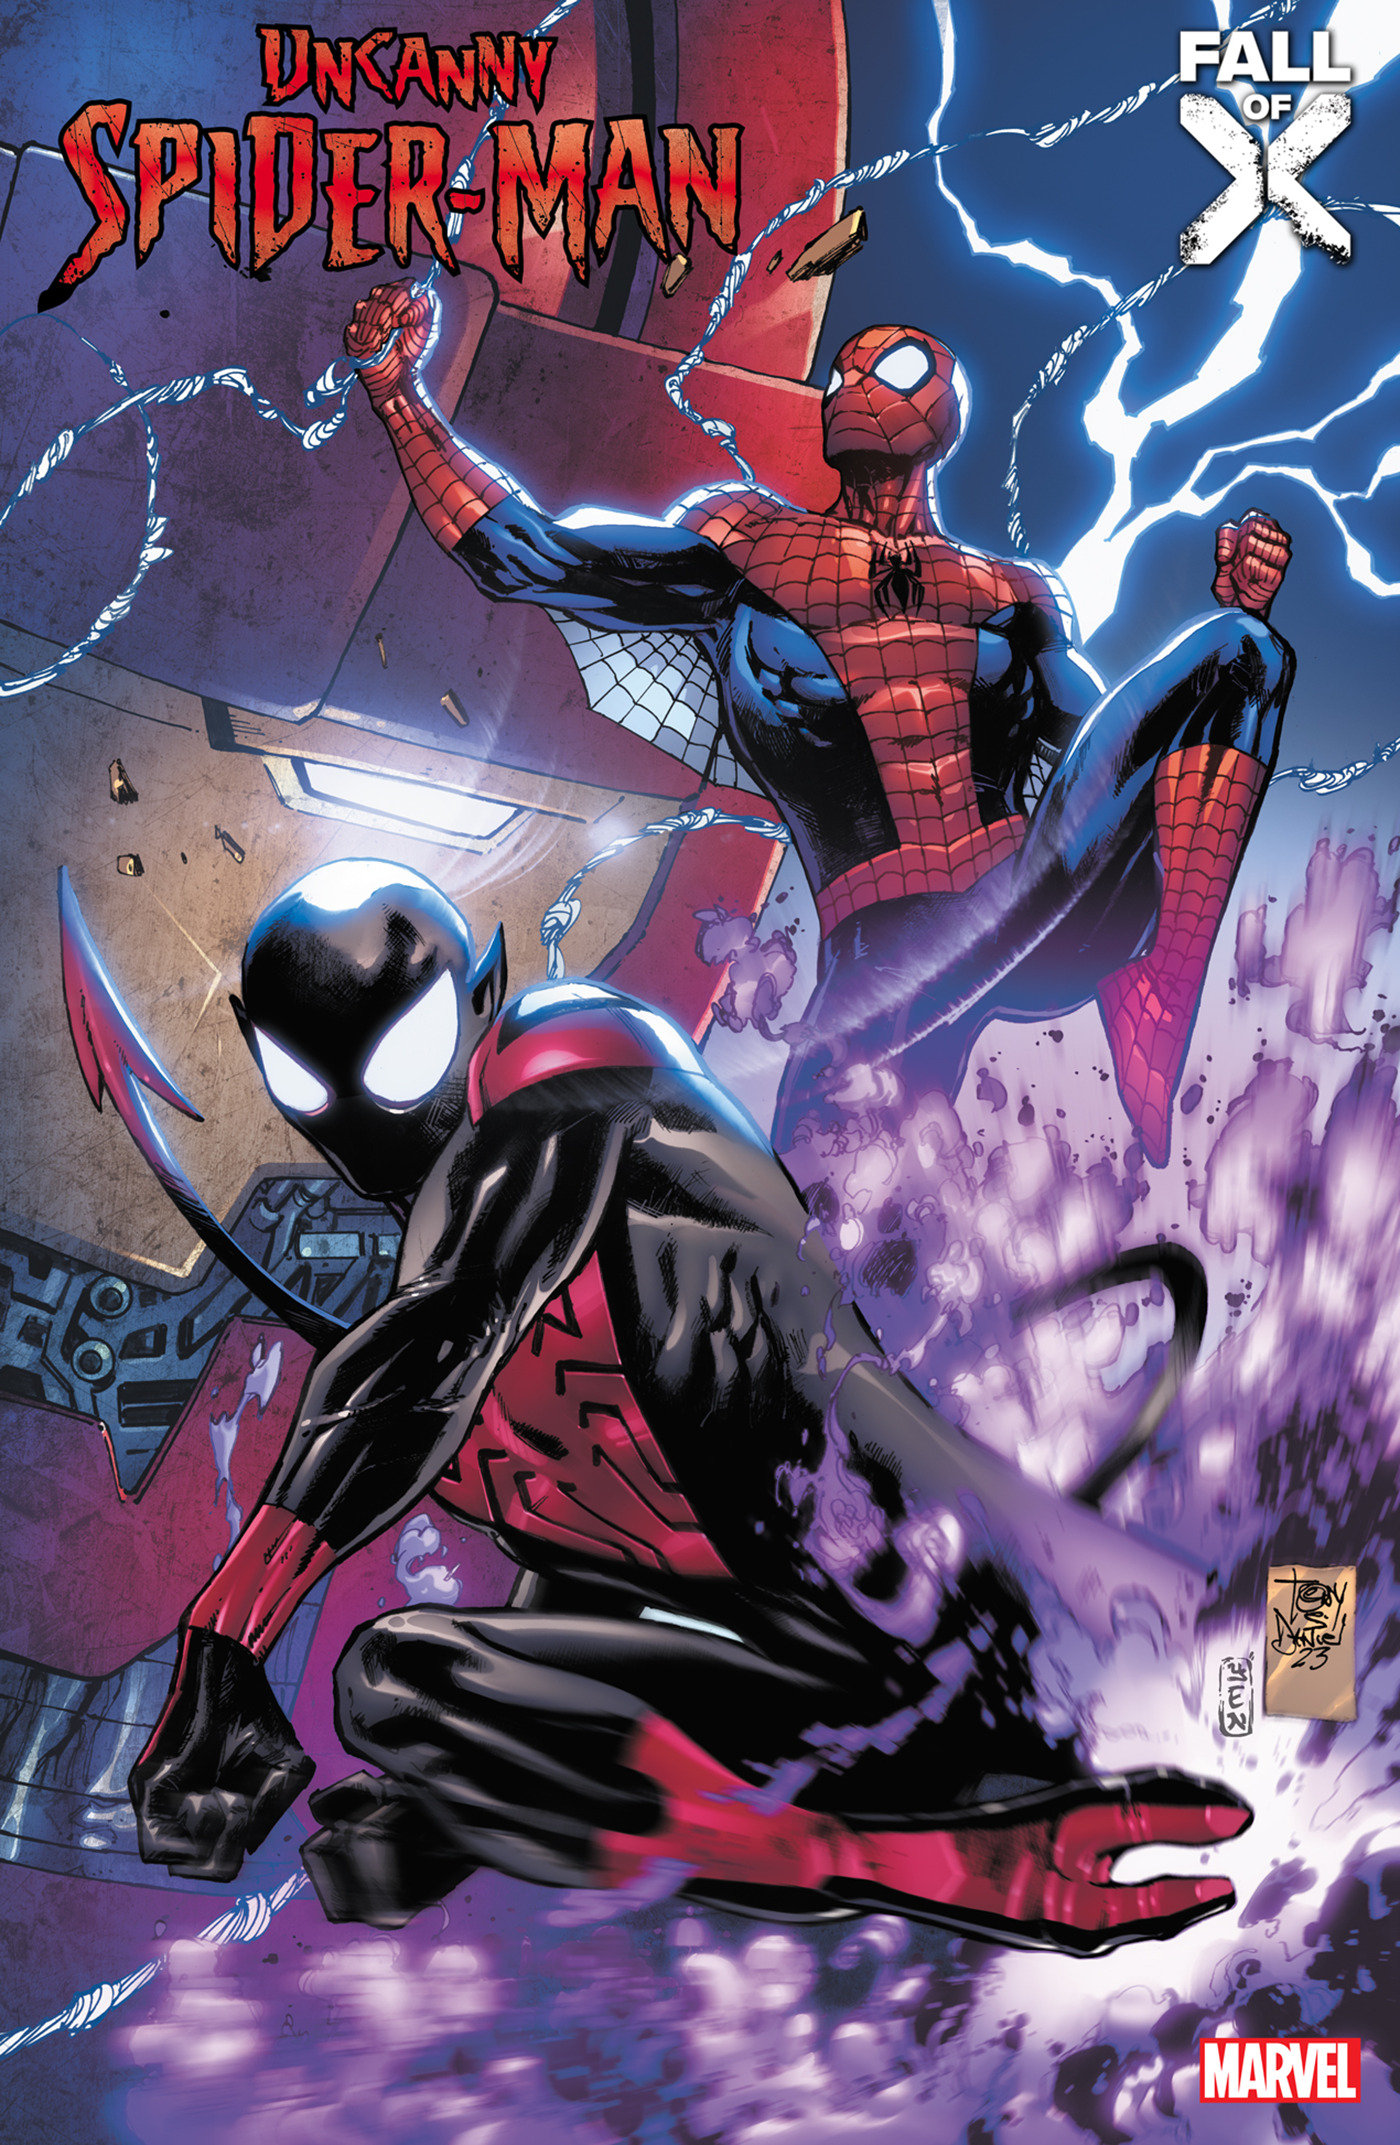 Uncanny Spider-Man #4 (Fall of X)